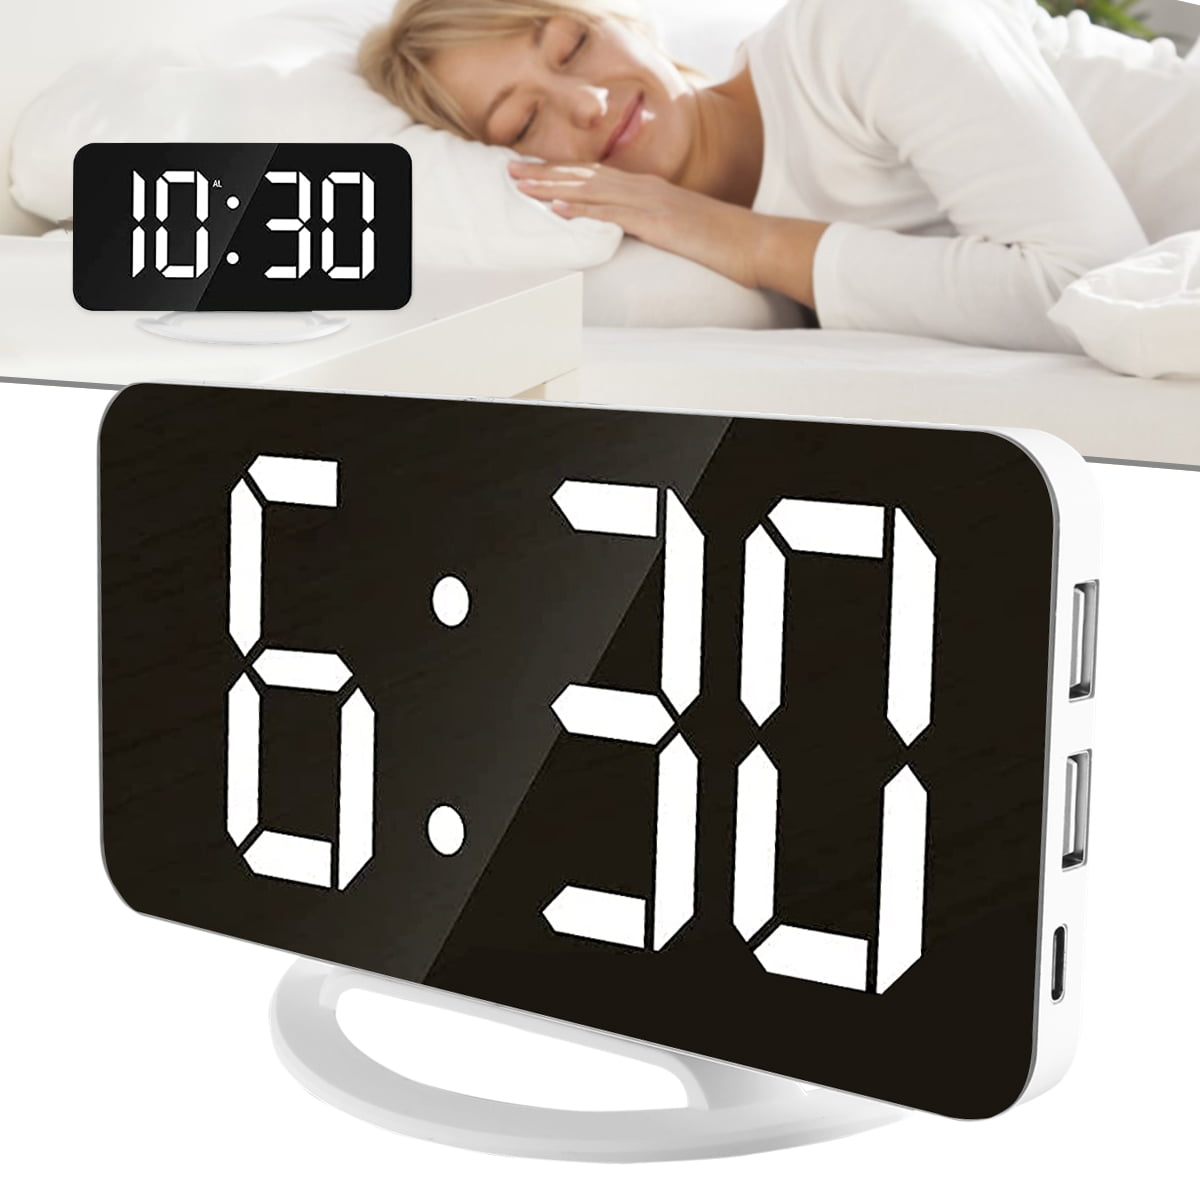 Projection Alarm Clock 7.5'' Mirror Digital Clock with USB Charging Port 2 Alarms Snooze Auto Dimmer Temperature Humidity 12/24H for Bedroom Home Office Coikes Radio Alarm Clock 